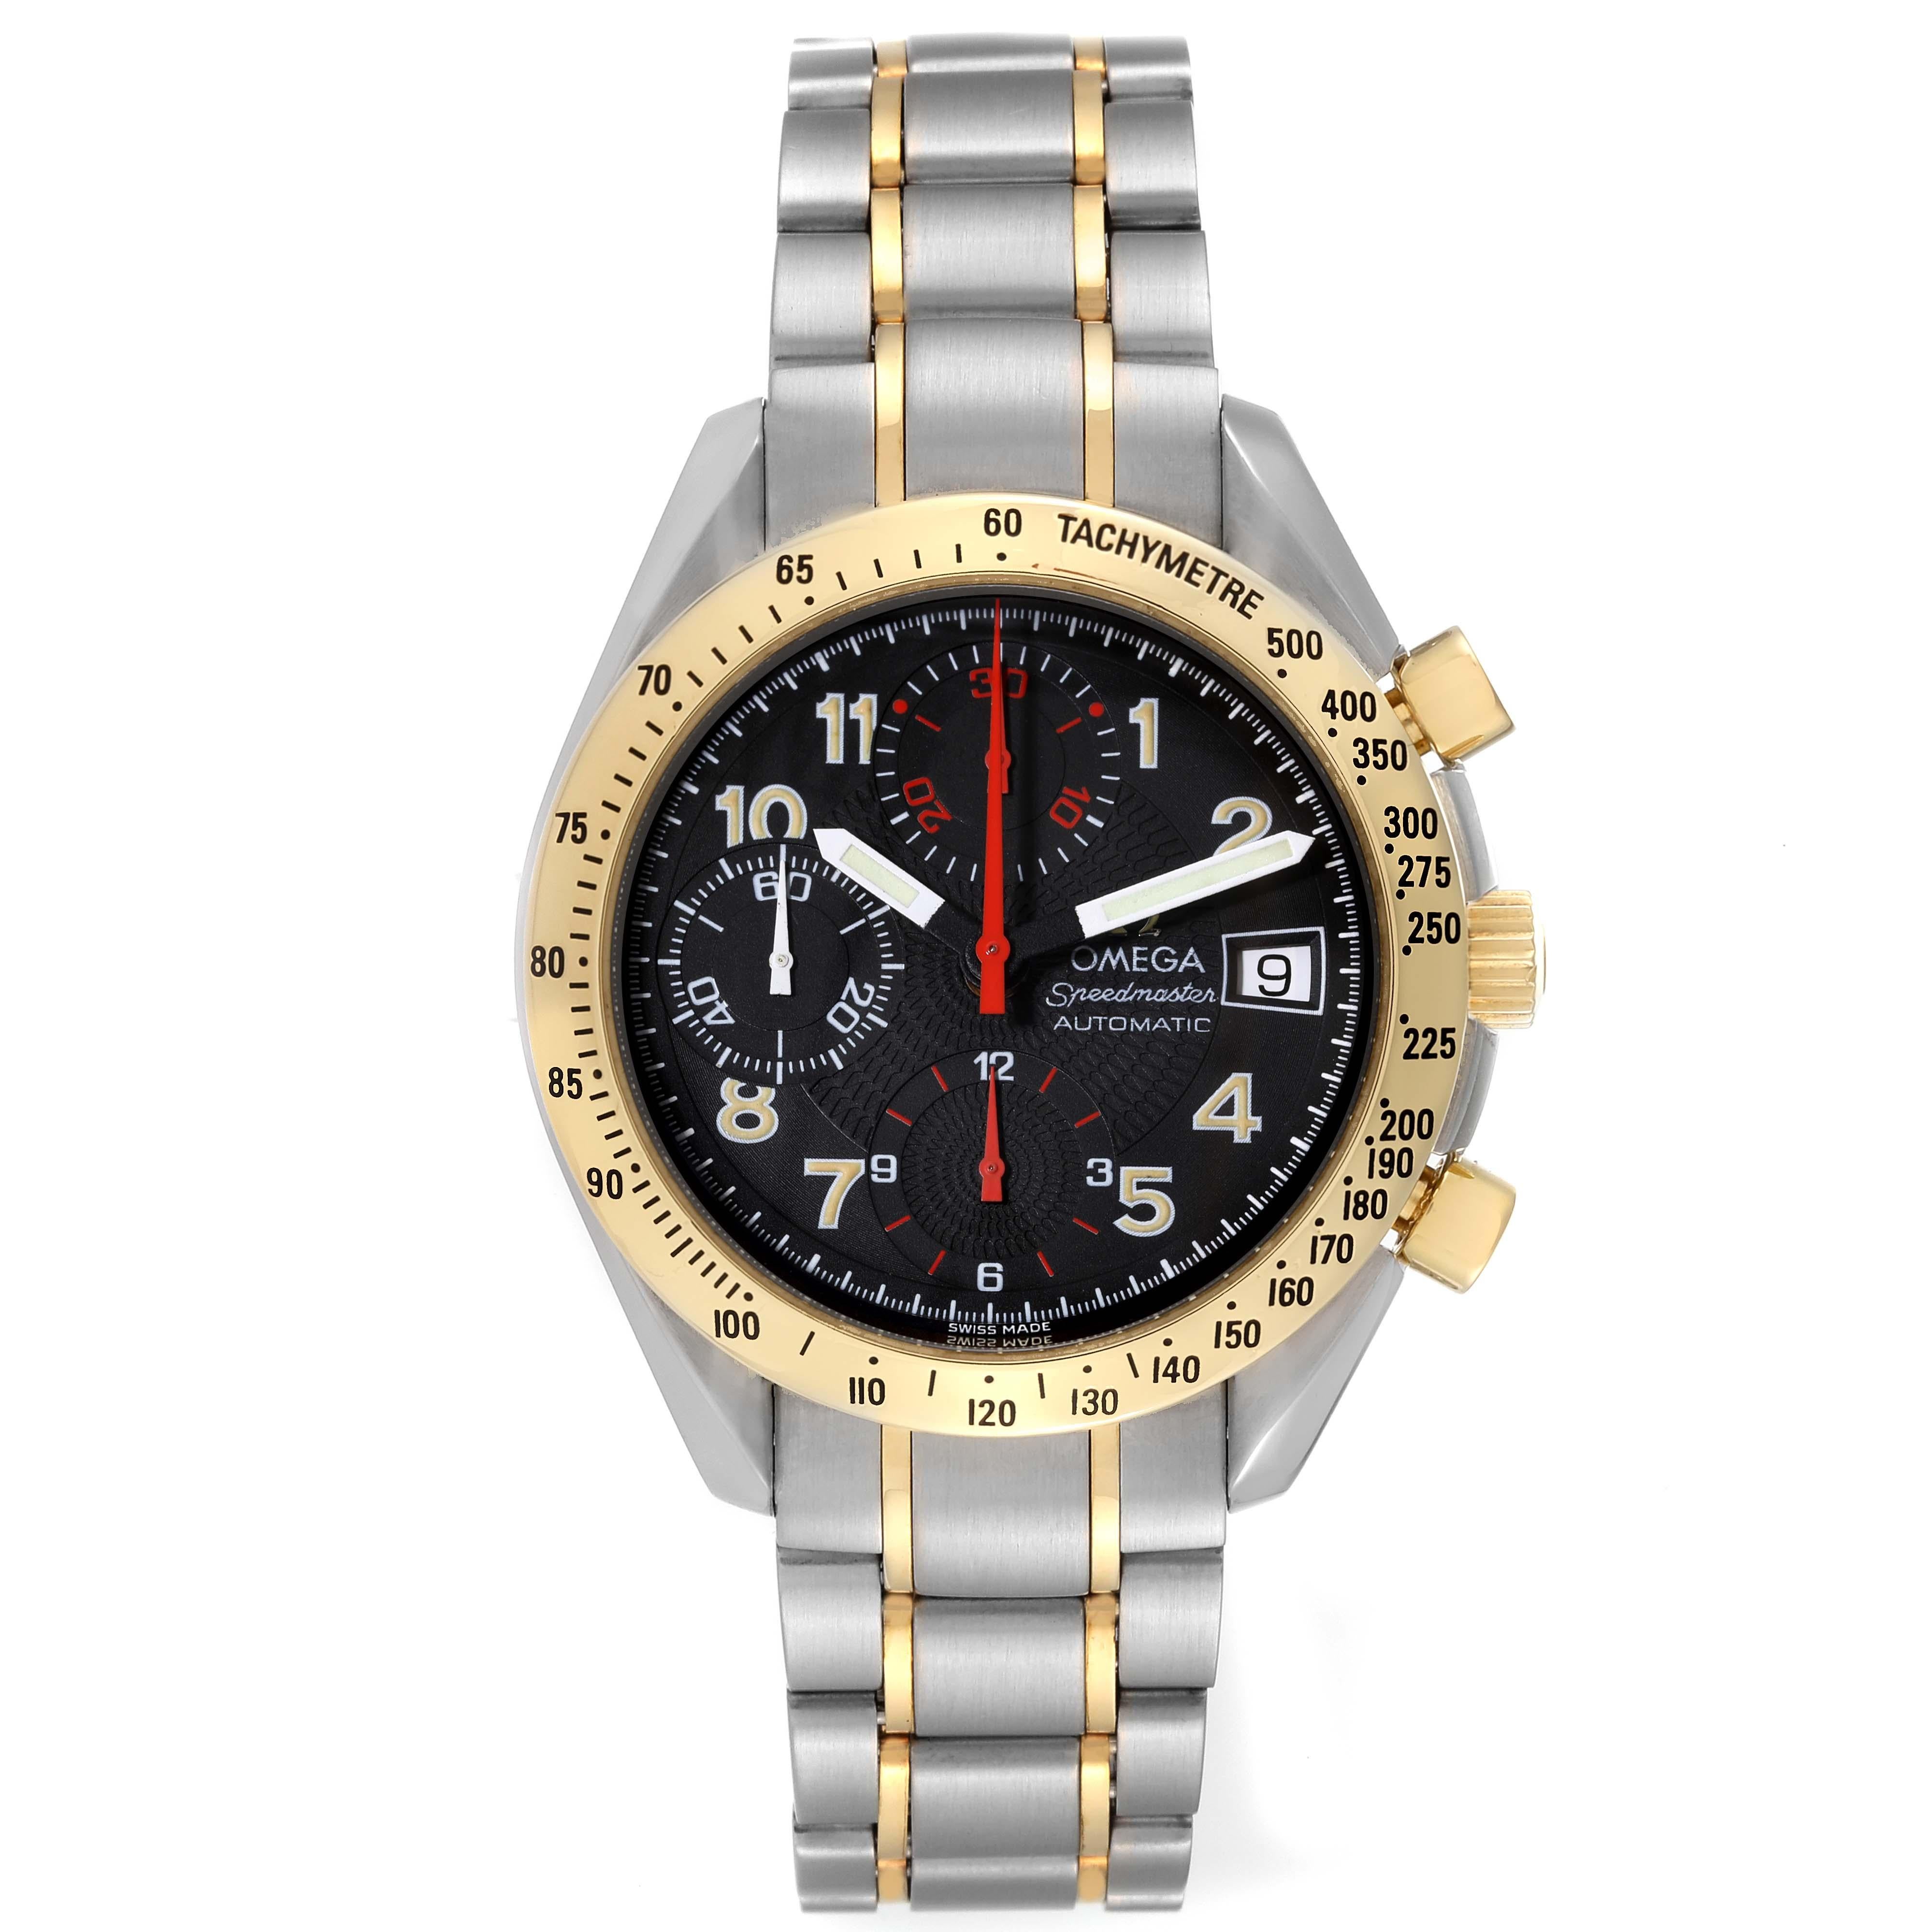 Omega Speedmaster Mark 40 Steel Yellow Gold Automatic Mens Watch 3313.53.00. Automatic self-winding chronograph movement. Stainless steel and yellow gold round case 39.0 mm in diameter. 18K yellow gold bezel with engraved tachymetre function.